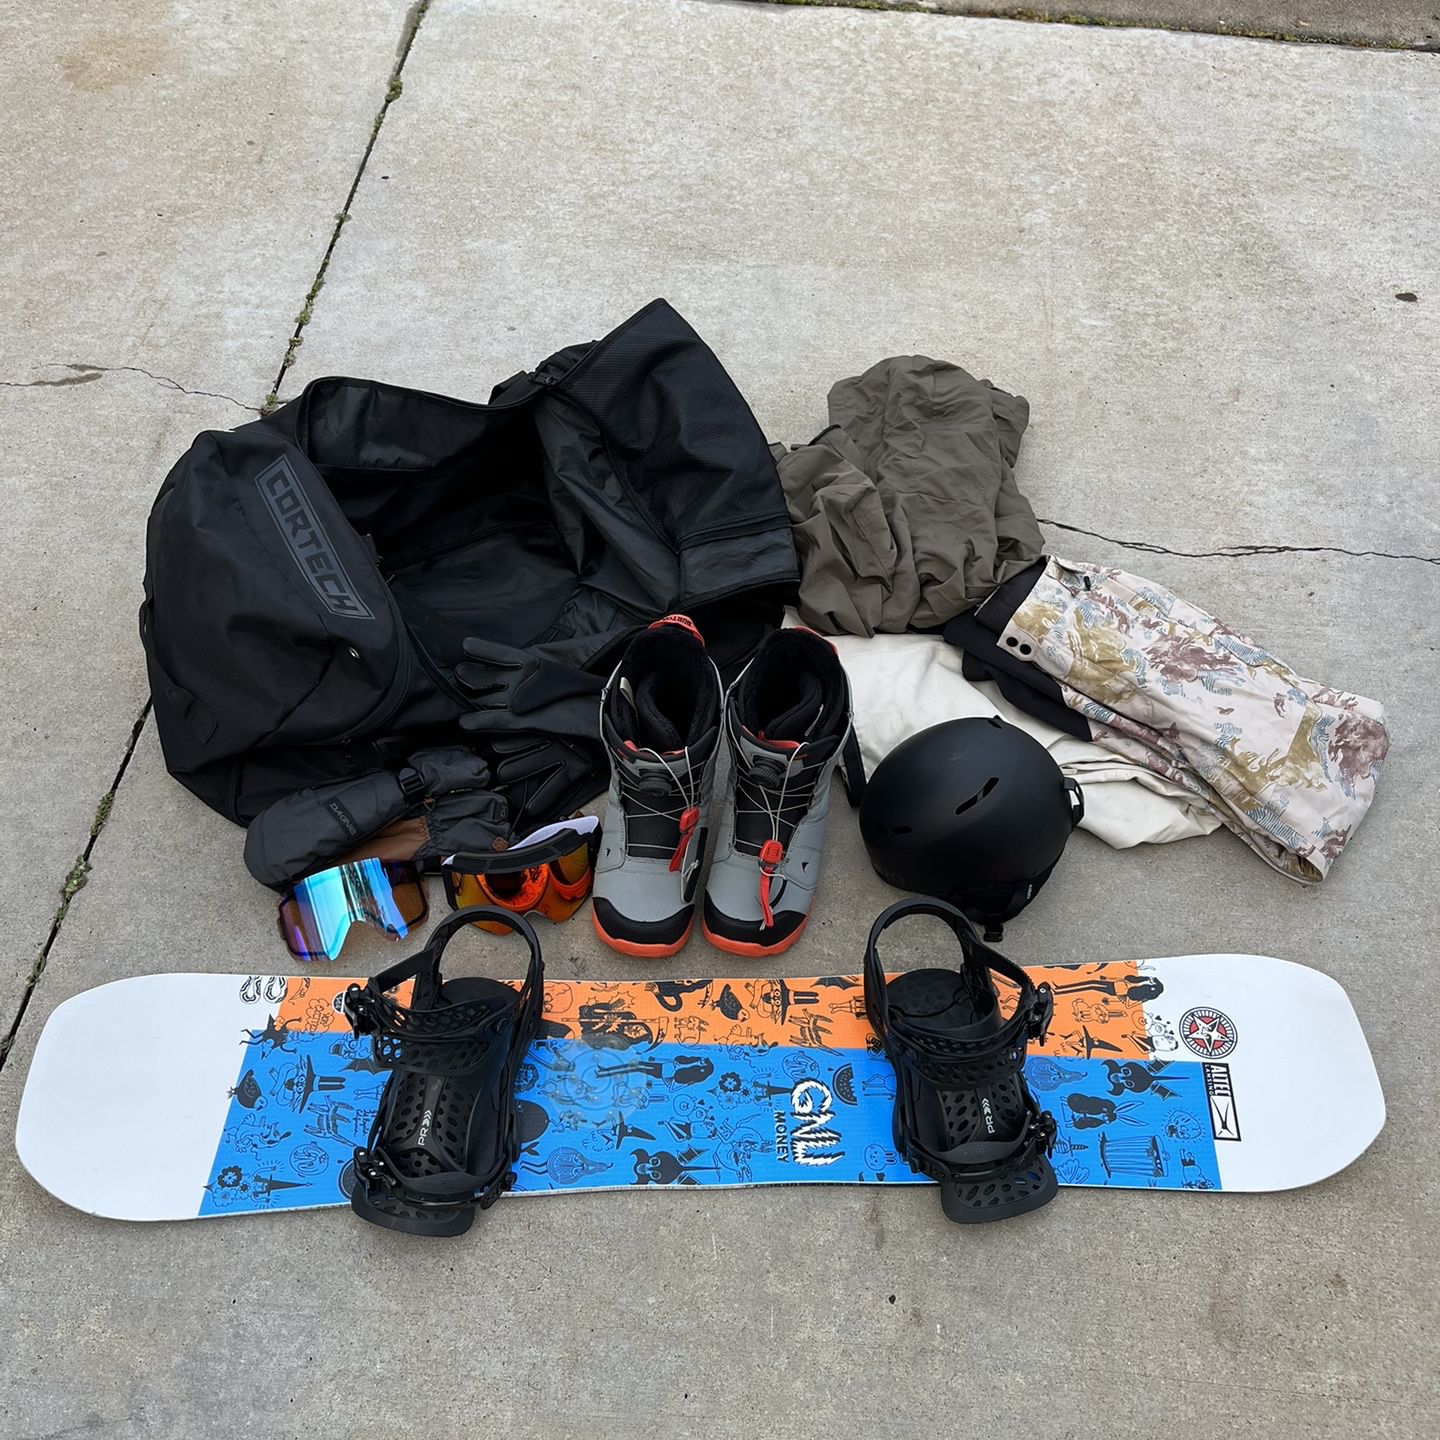 Snowboard And Gear